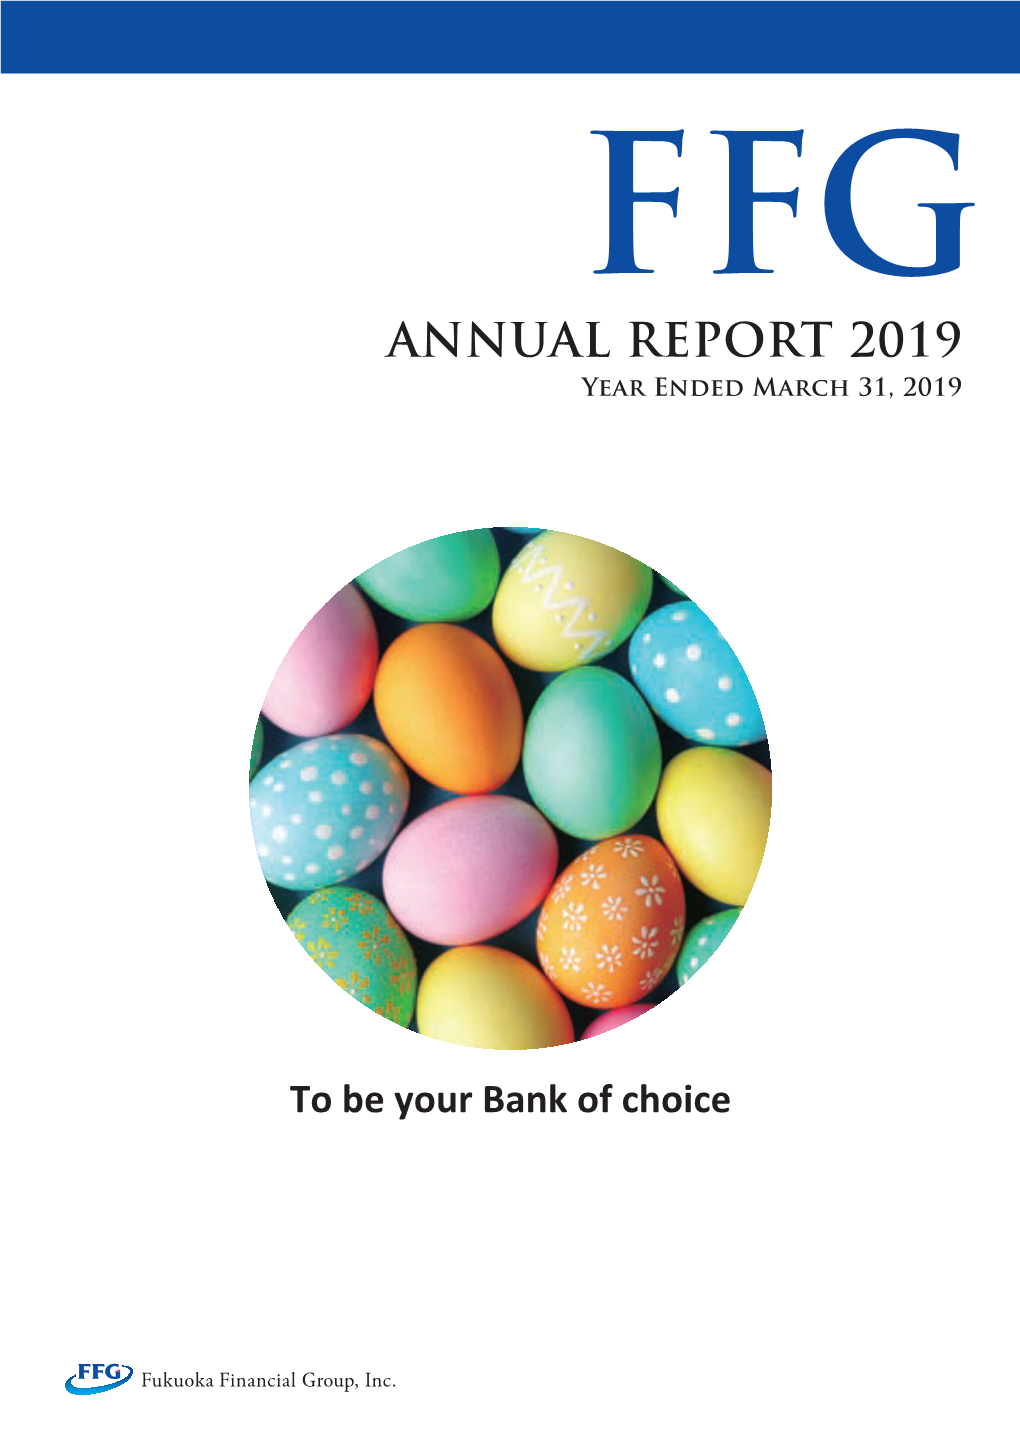 ANNUAL REPORT 2019 FFG ANNUAL REPORT 2019 Year Ended March 31, 2019